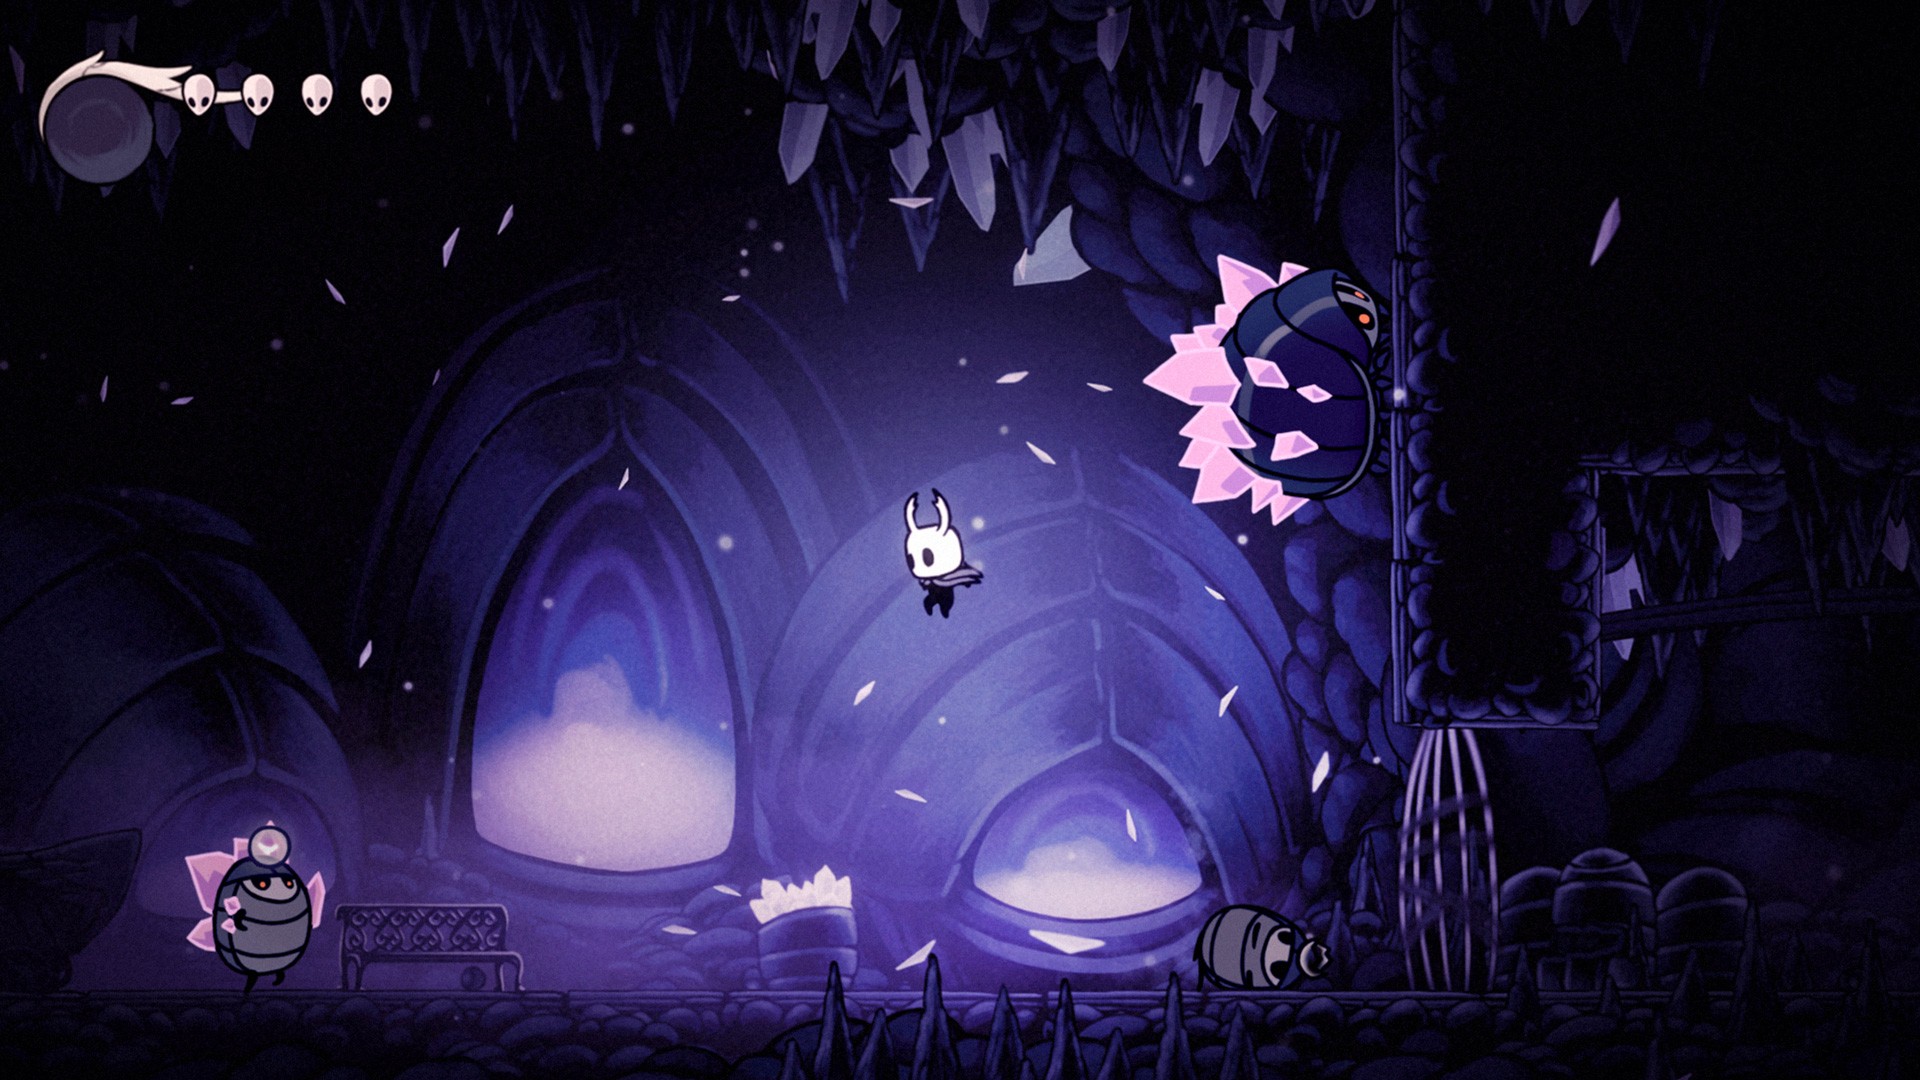 Wallpaper HD Hollow Knight Game with high-resolution 1920x1080 pixel. You can use this wallpaper for your Windows and Mac OS computers as well as your Android and iPhone smartphones